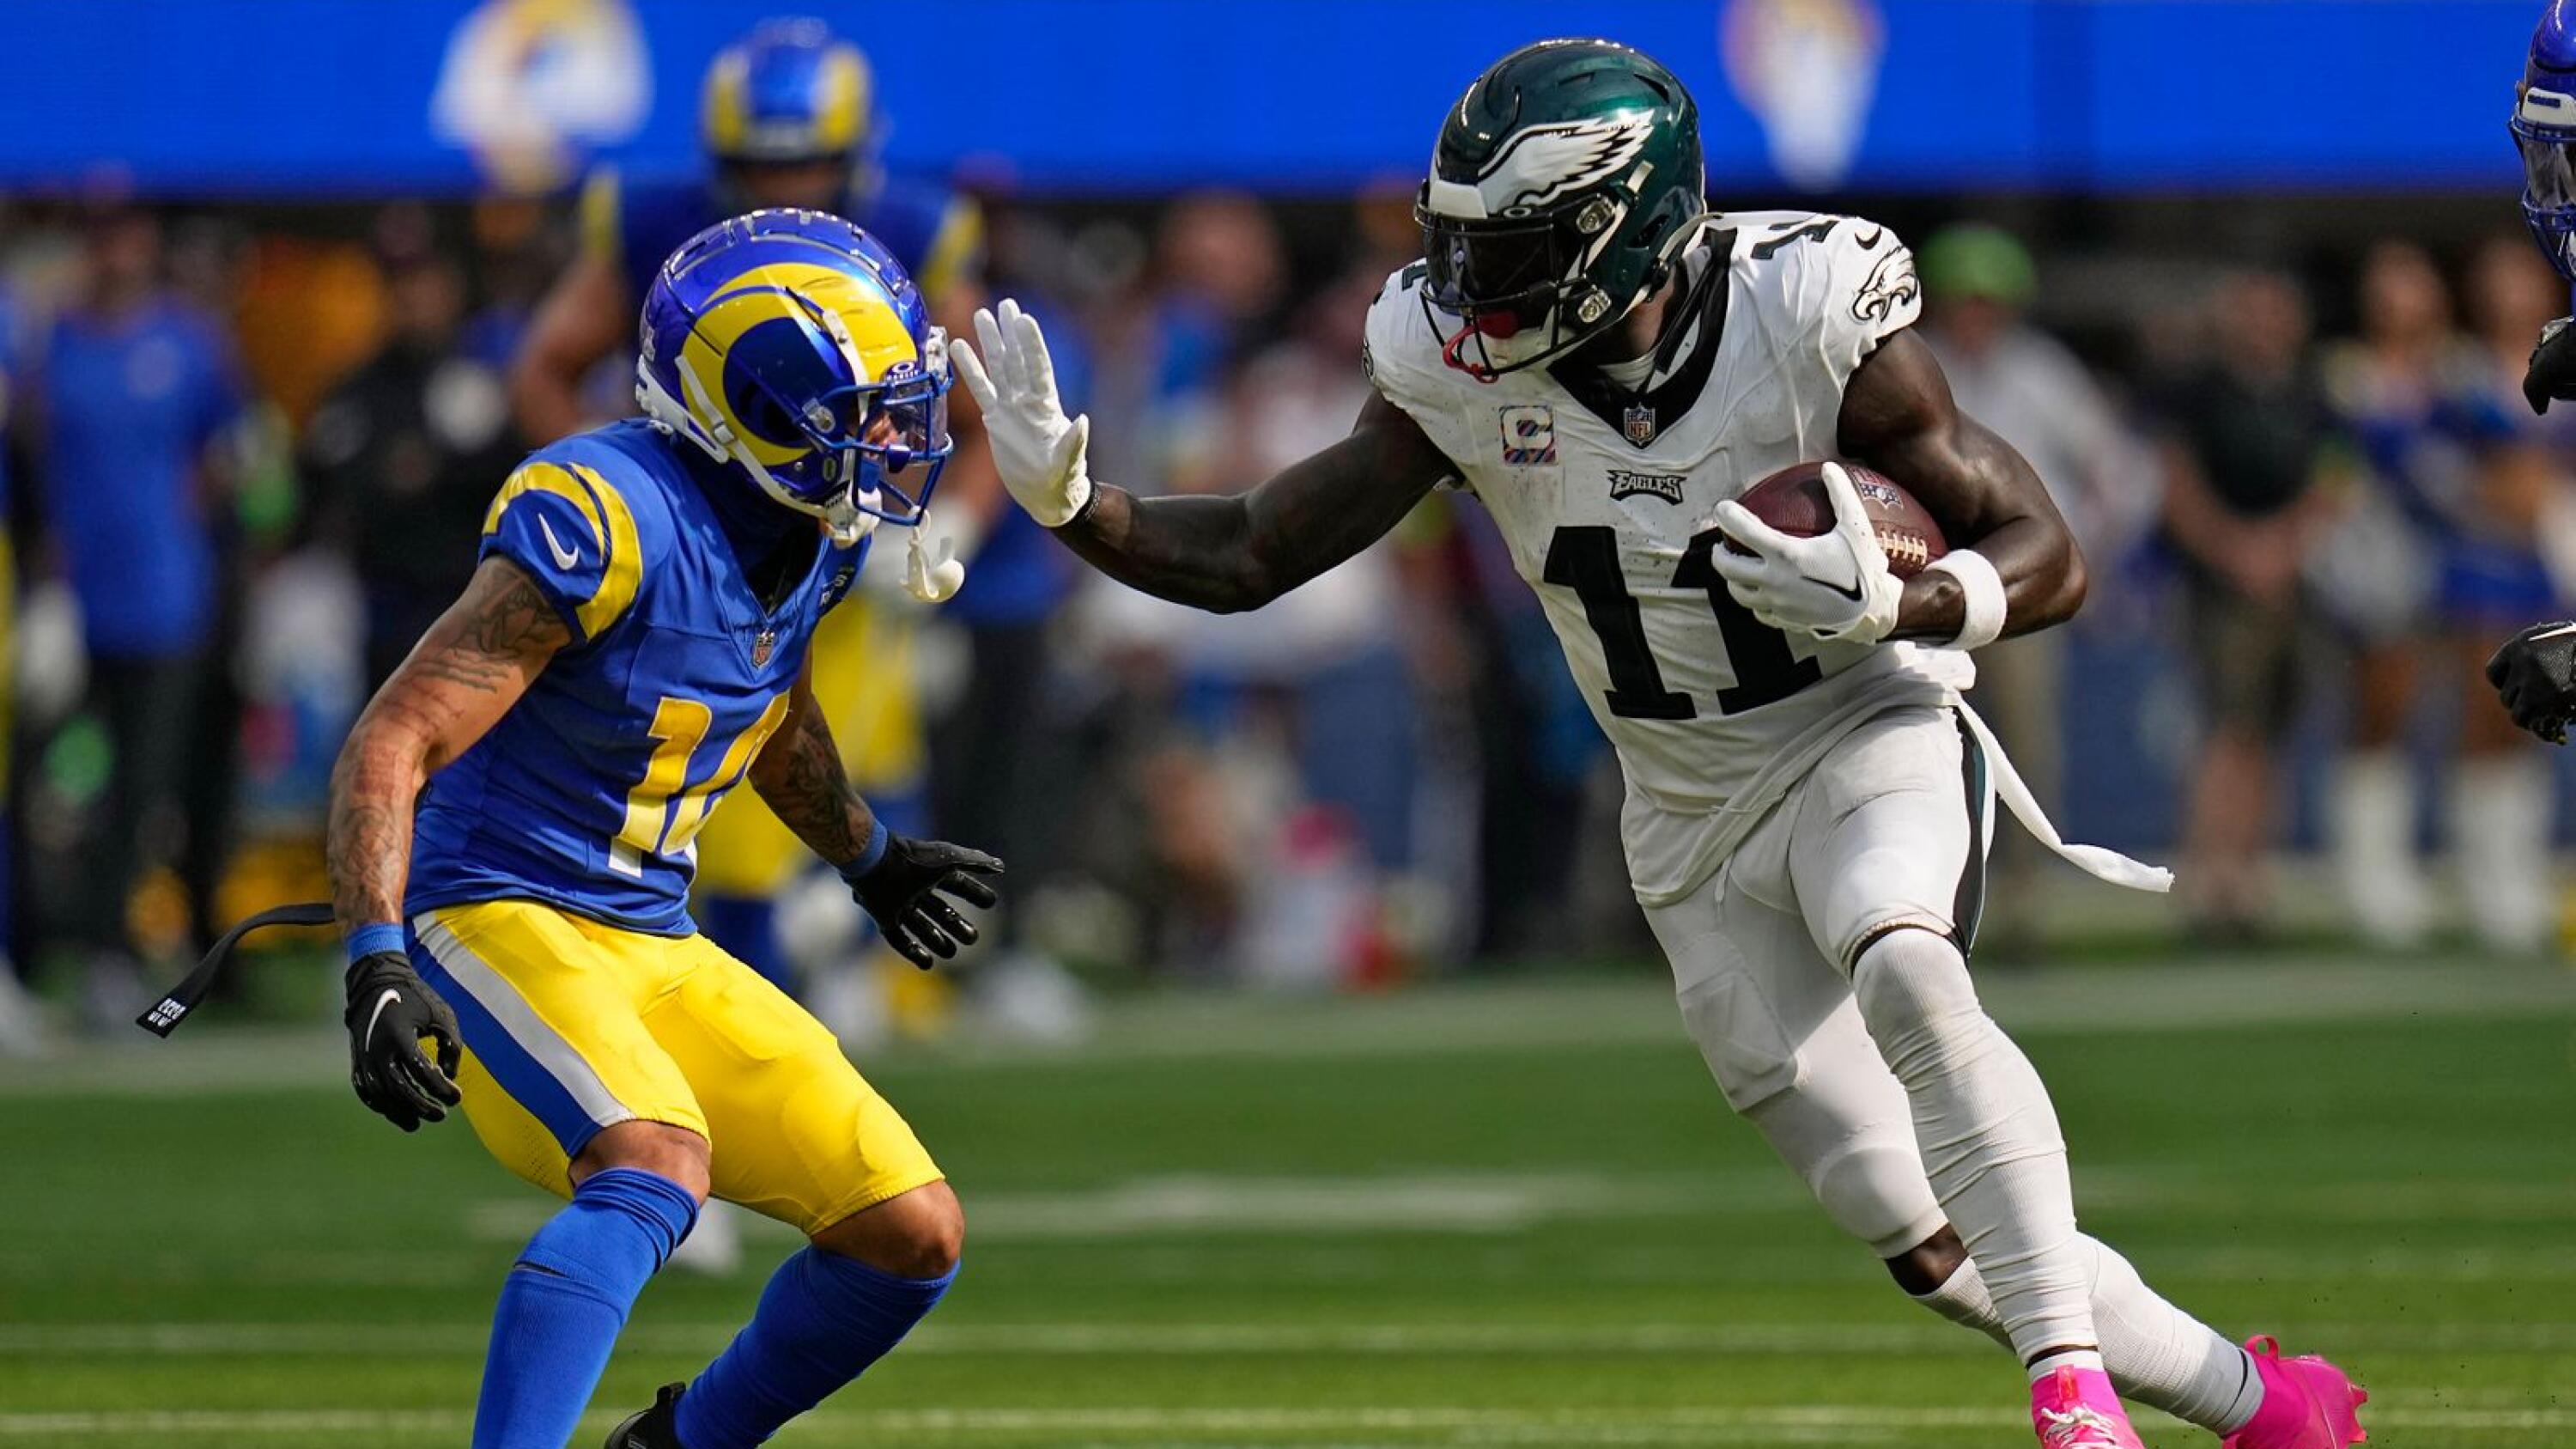 Grades: Eagles defense didn't look good on the Rams' first drive but  bounced back